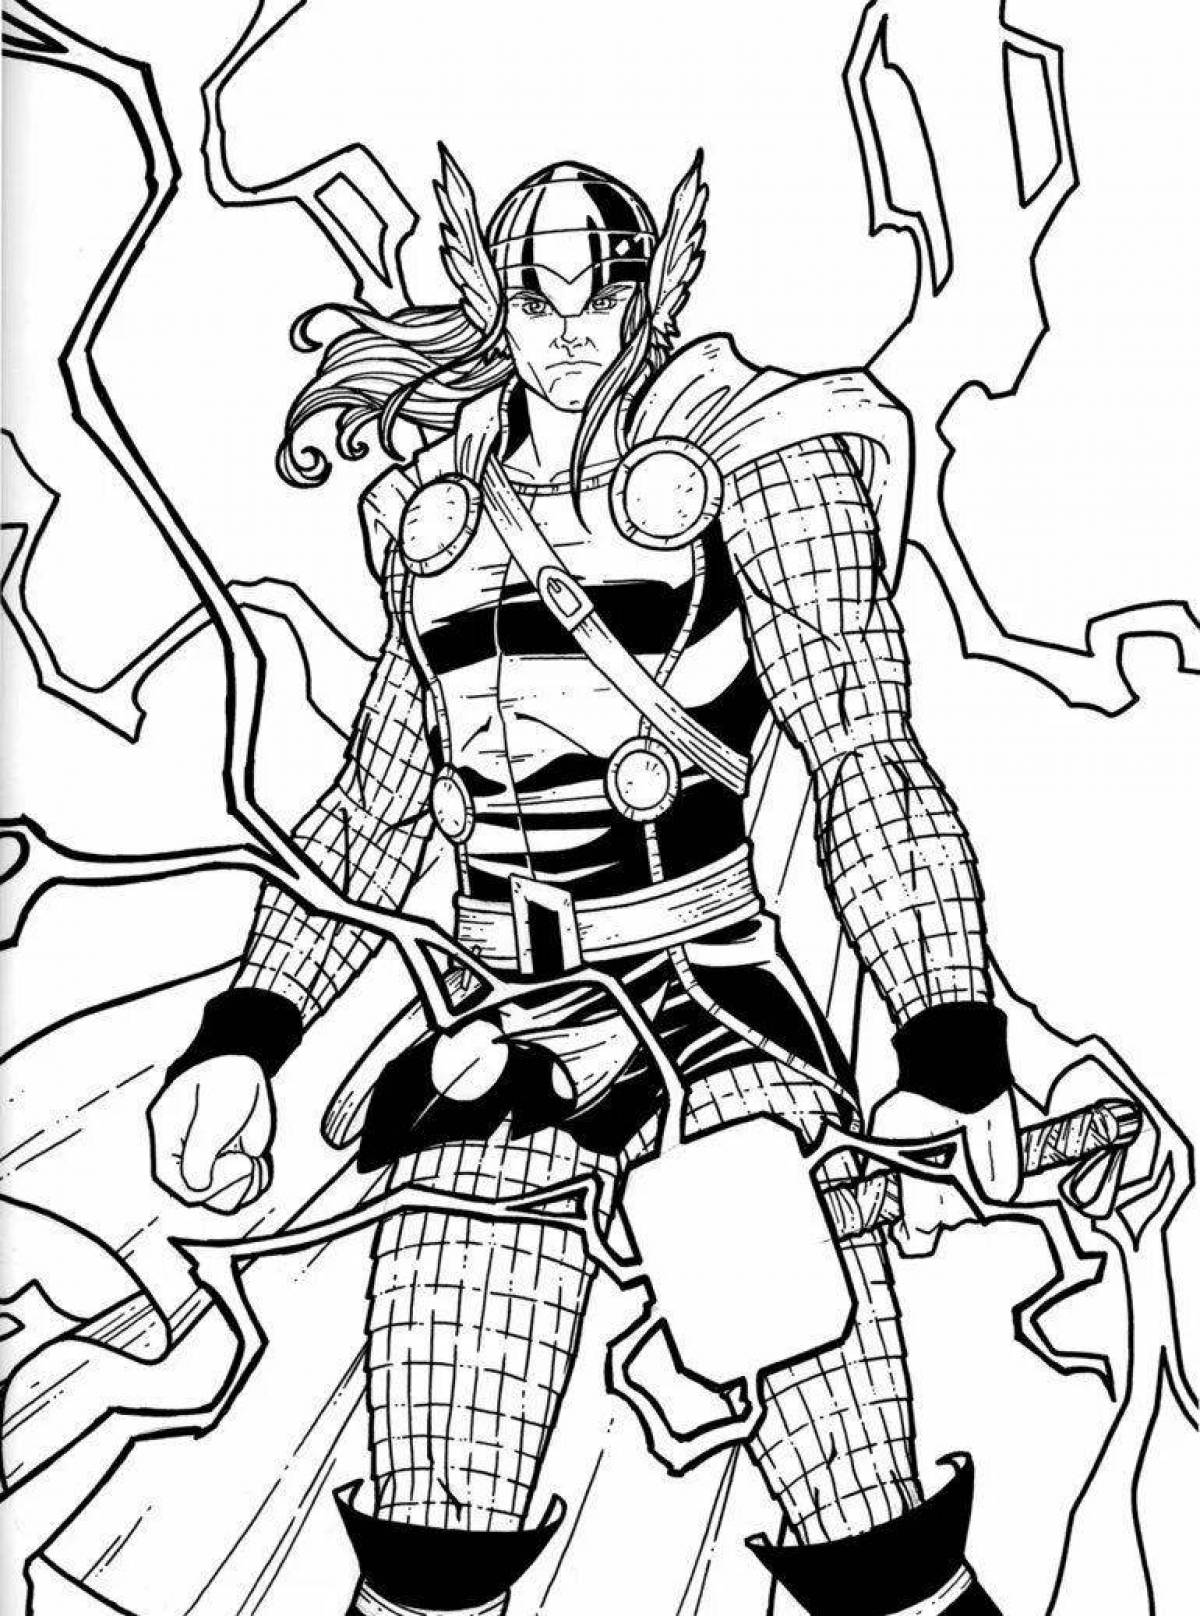 Joyful Thor coloring pages for kids